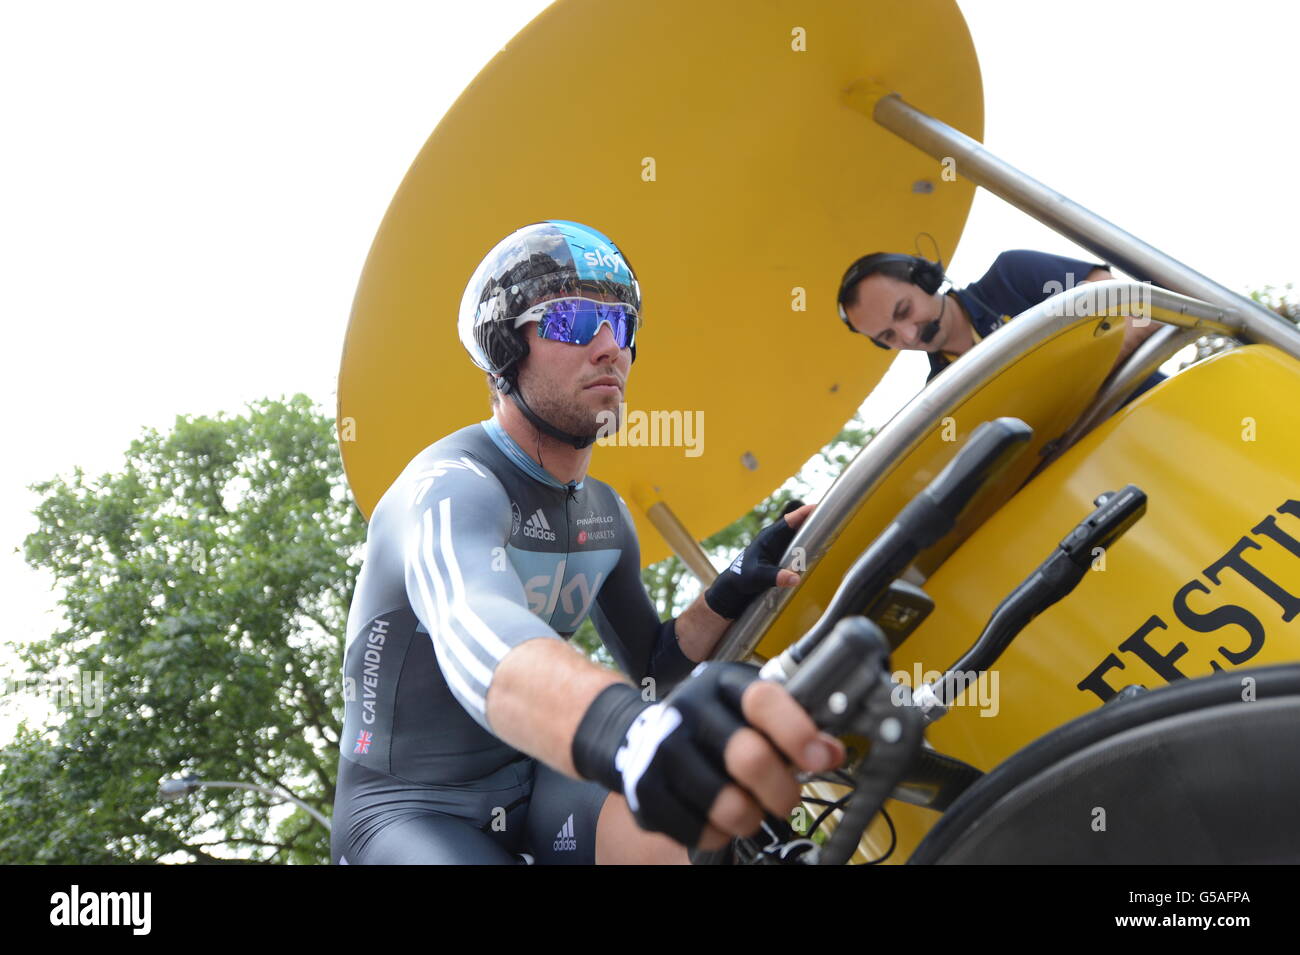 Team Sky's Mark Cavendish during the Prologue Stage of the 2012 Tour de France in Liege, Belgium. Stock Photo